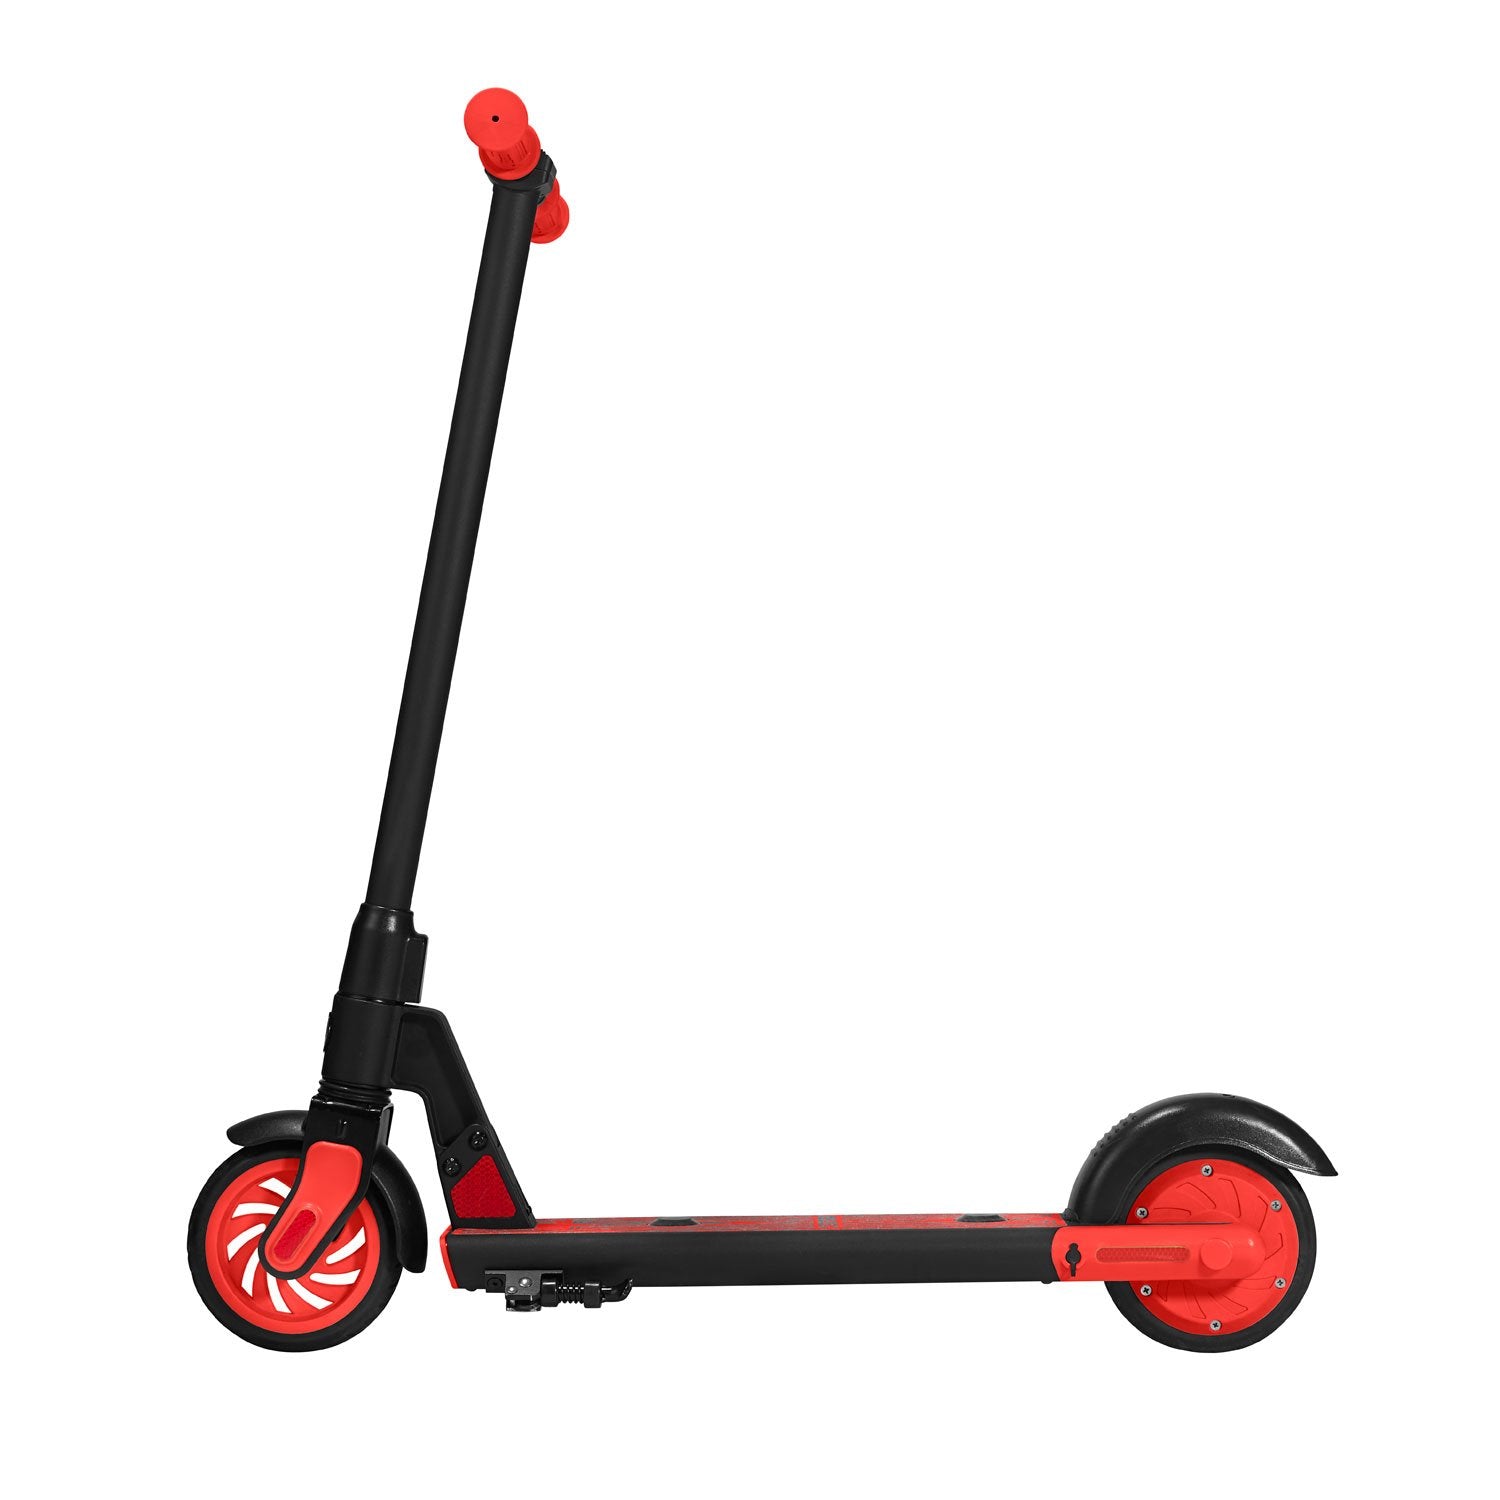 Red gks electric scooter for kids side image